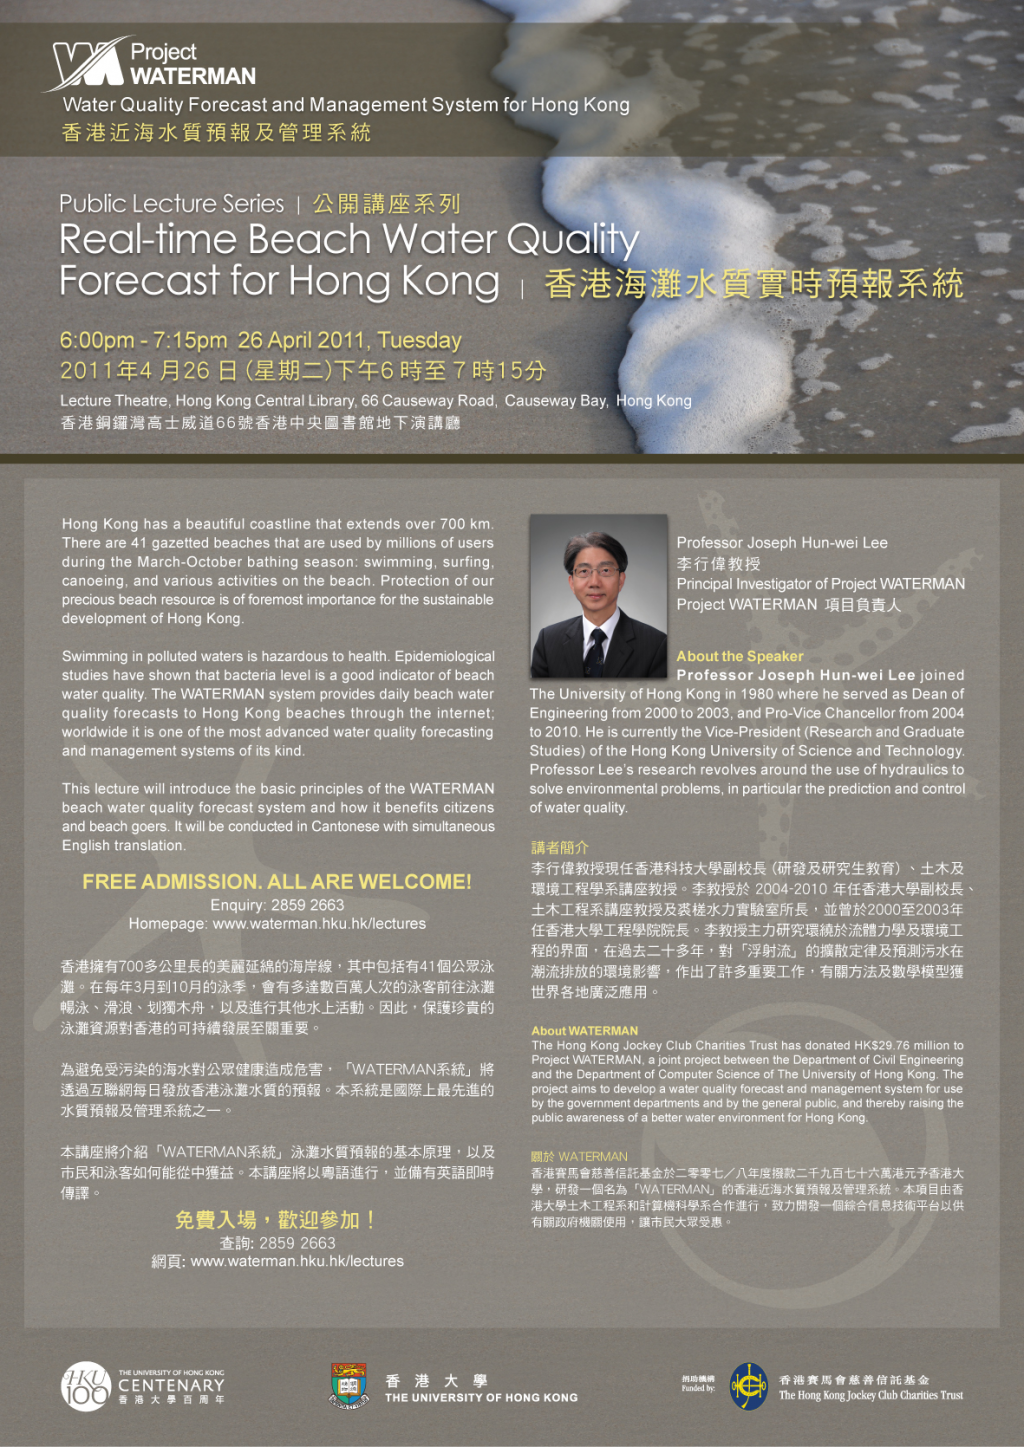 Project WATERMAN Public Lecture on Real-time Beach Water Quality Forecast for Hong Kong (Speaker: Professor Joseph Hun-wei Lee, Principal Investigator of Project WATERMAN)